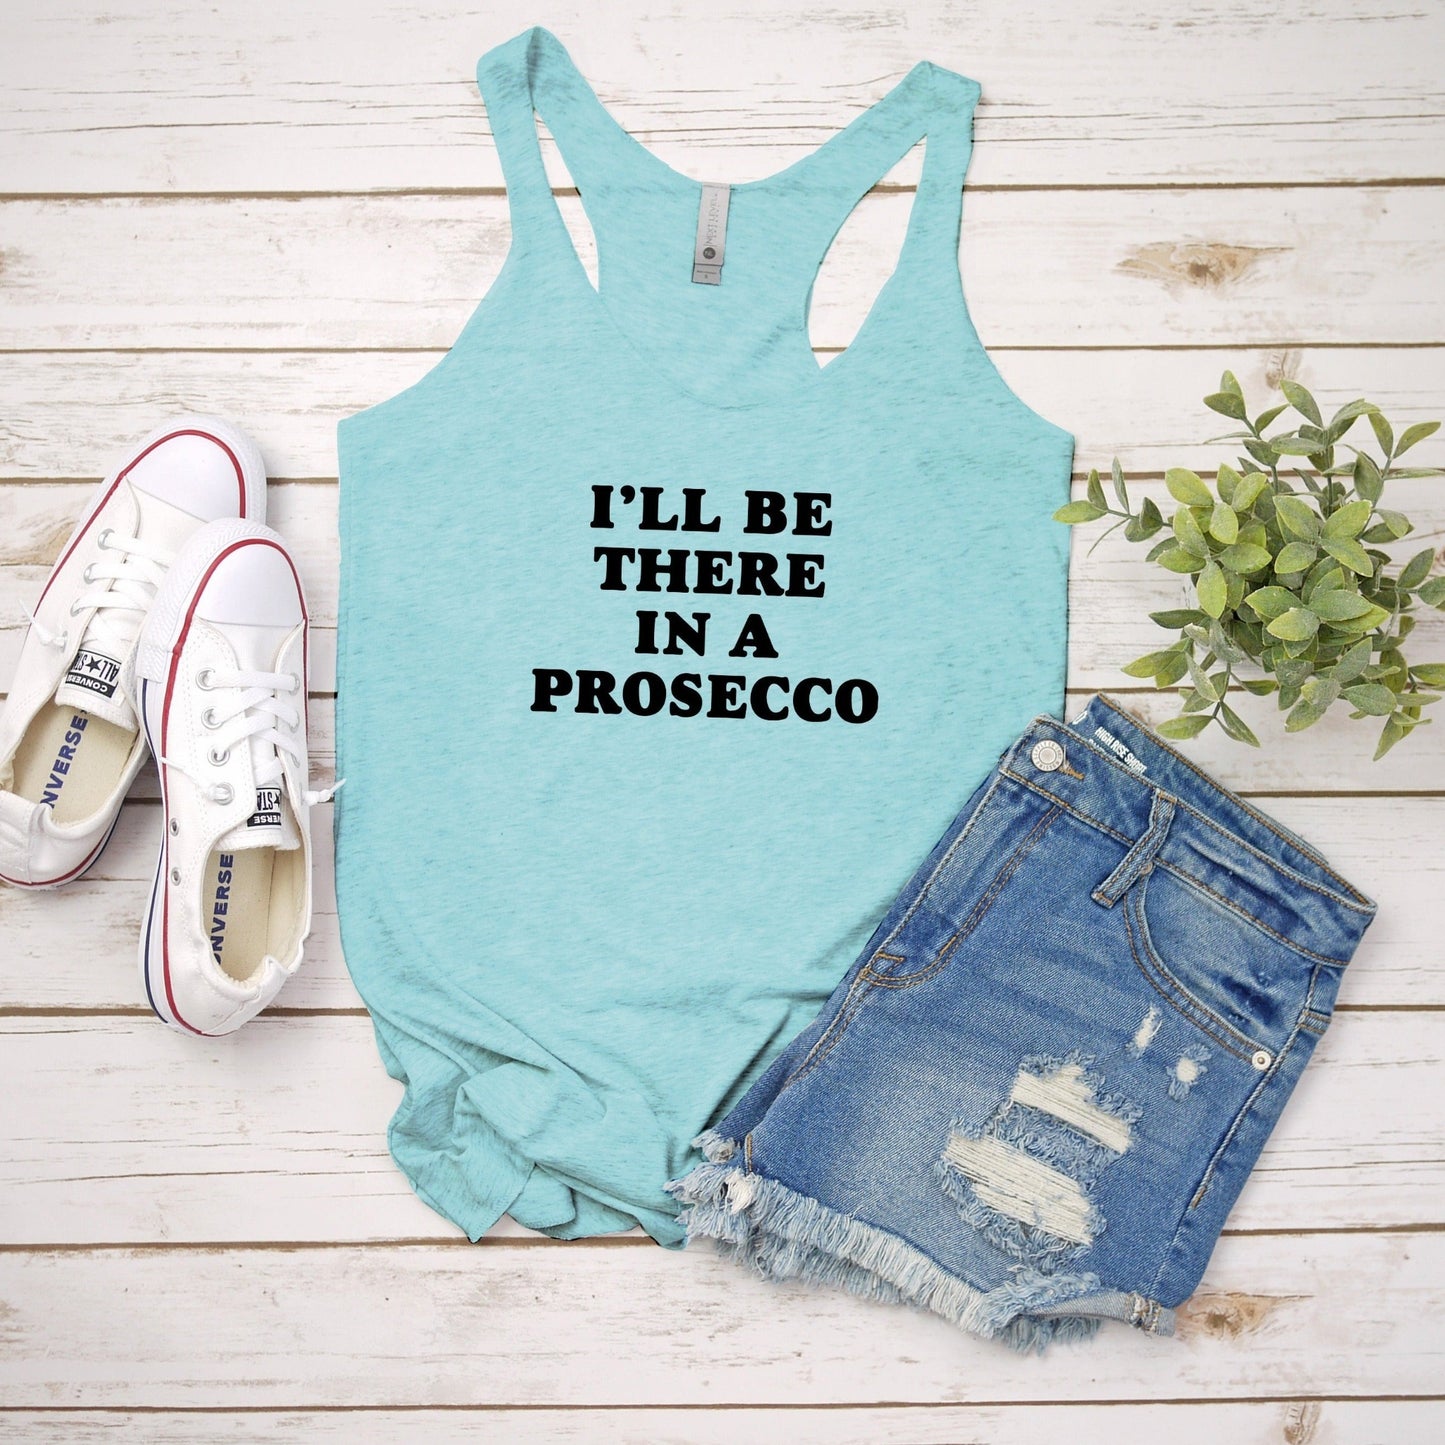 I'll Be There In a Prosecco - Bold Type - Women's Tank - Heather Gray, Tahiti, or Envy